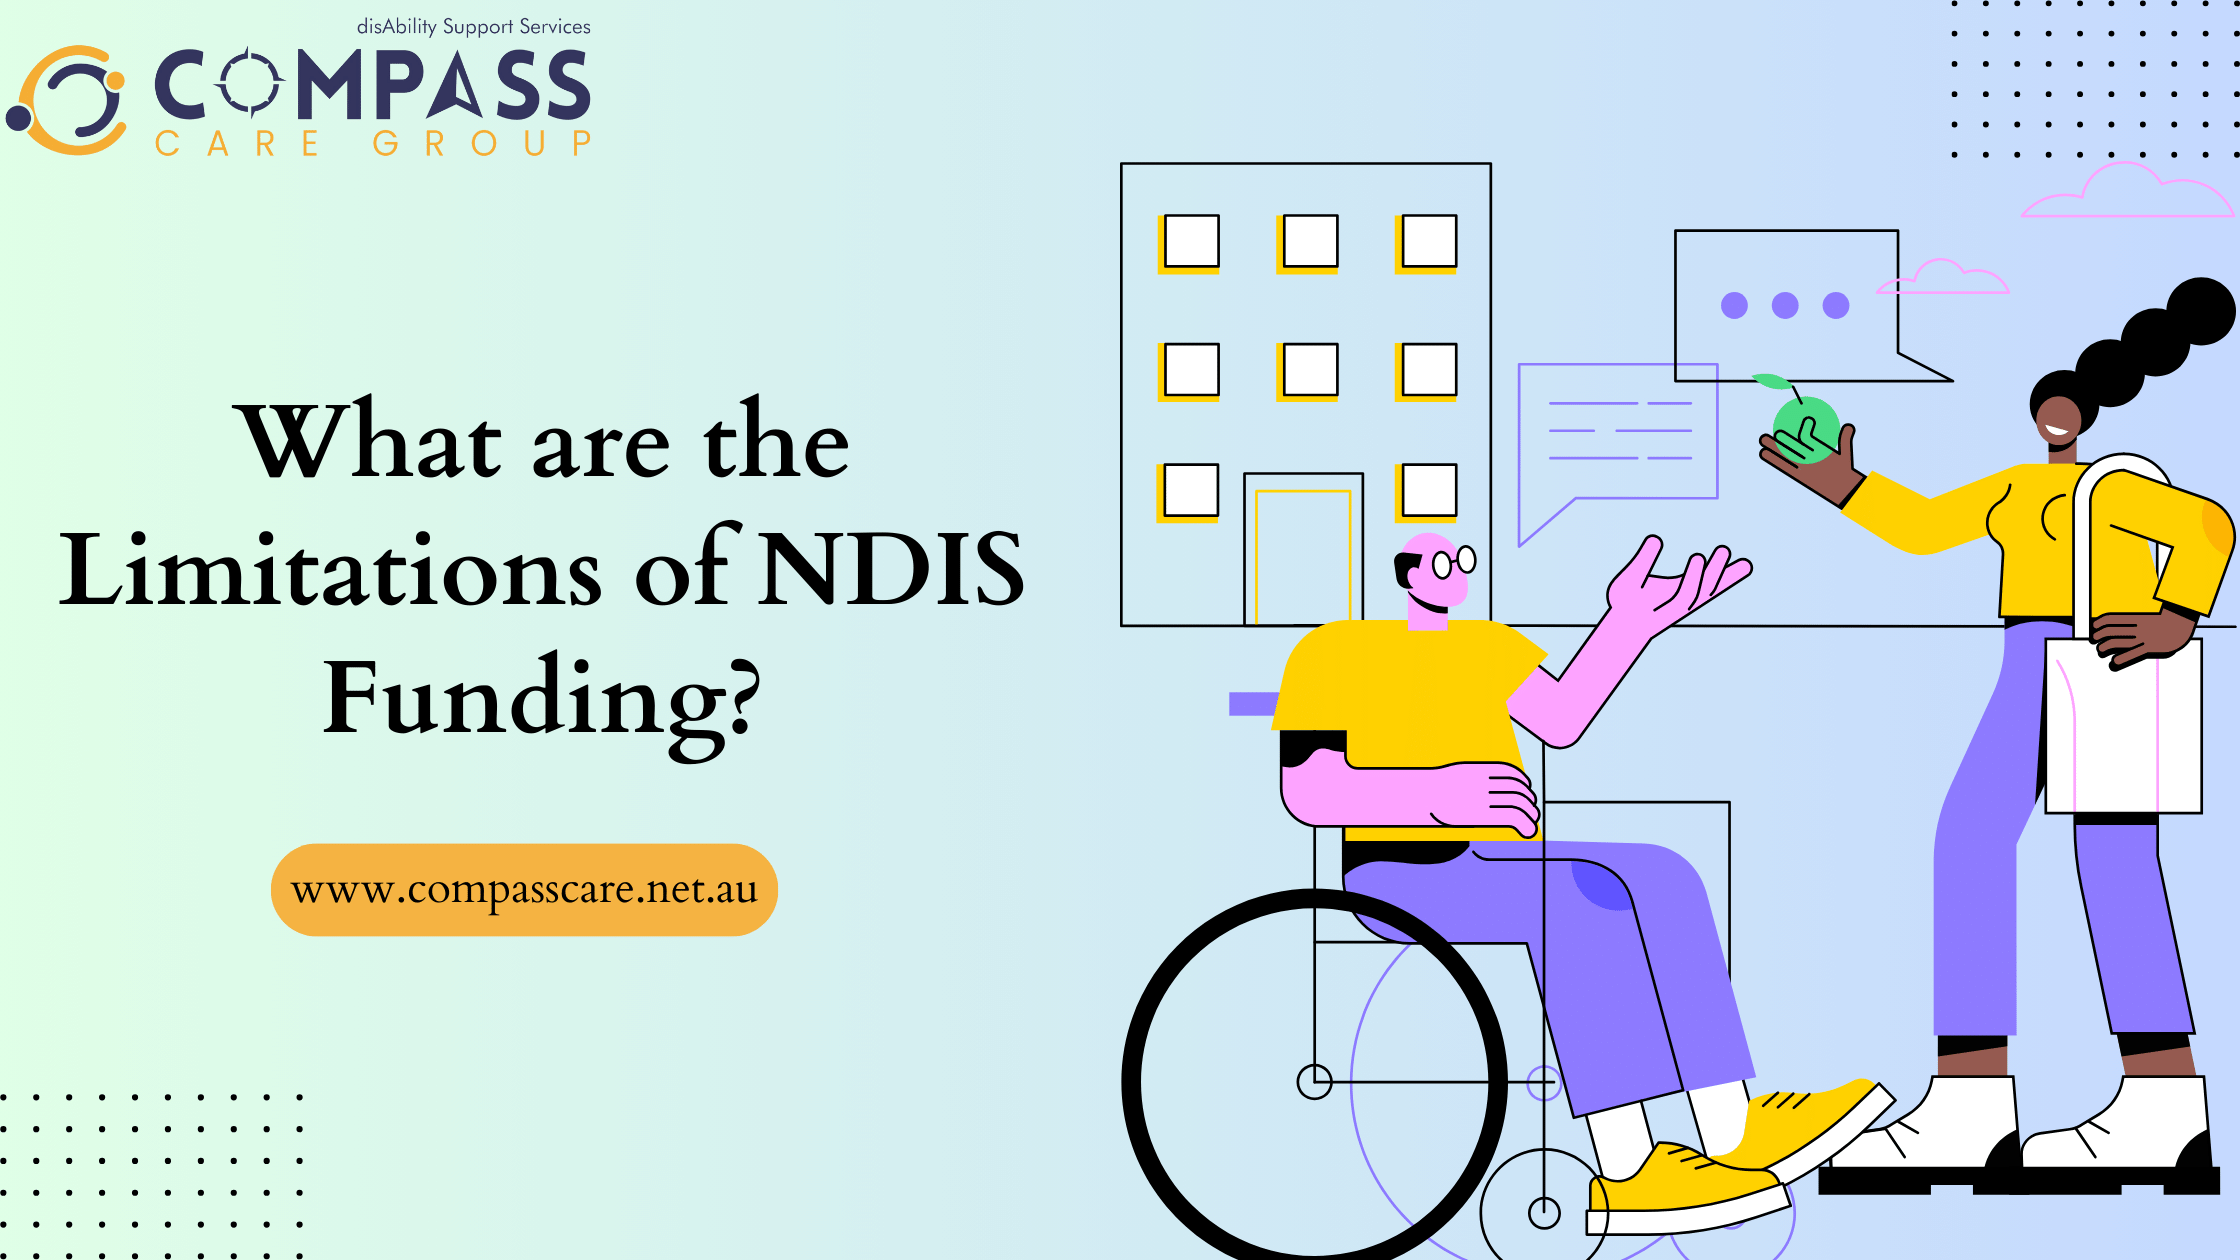 What are the Limitations of NDIS Funding?